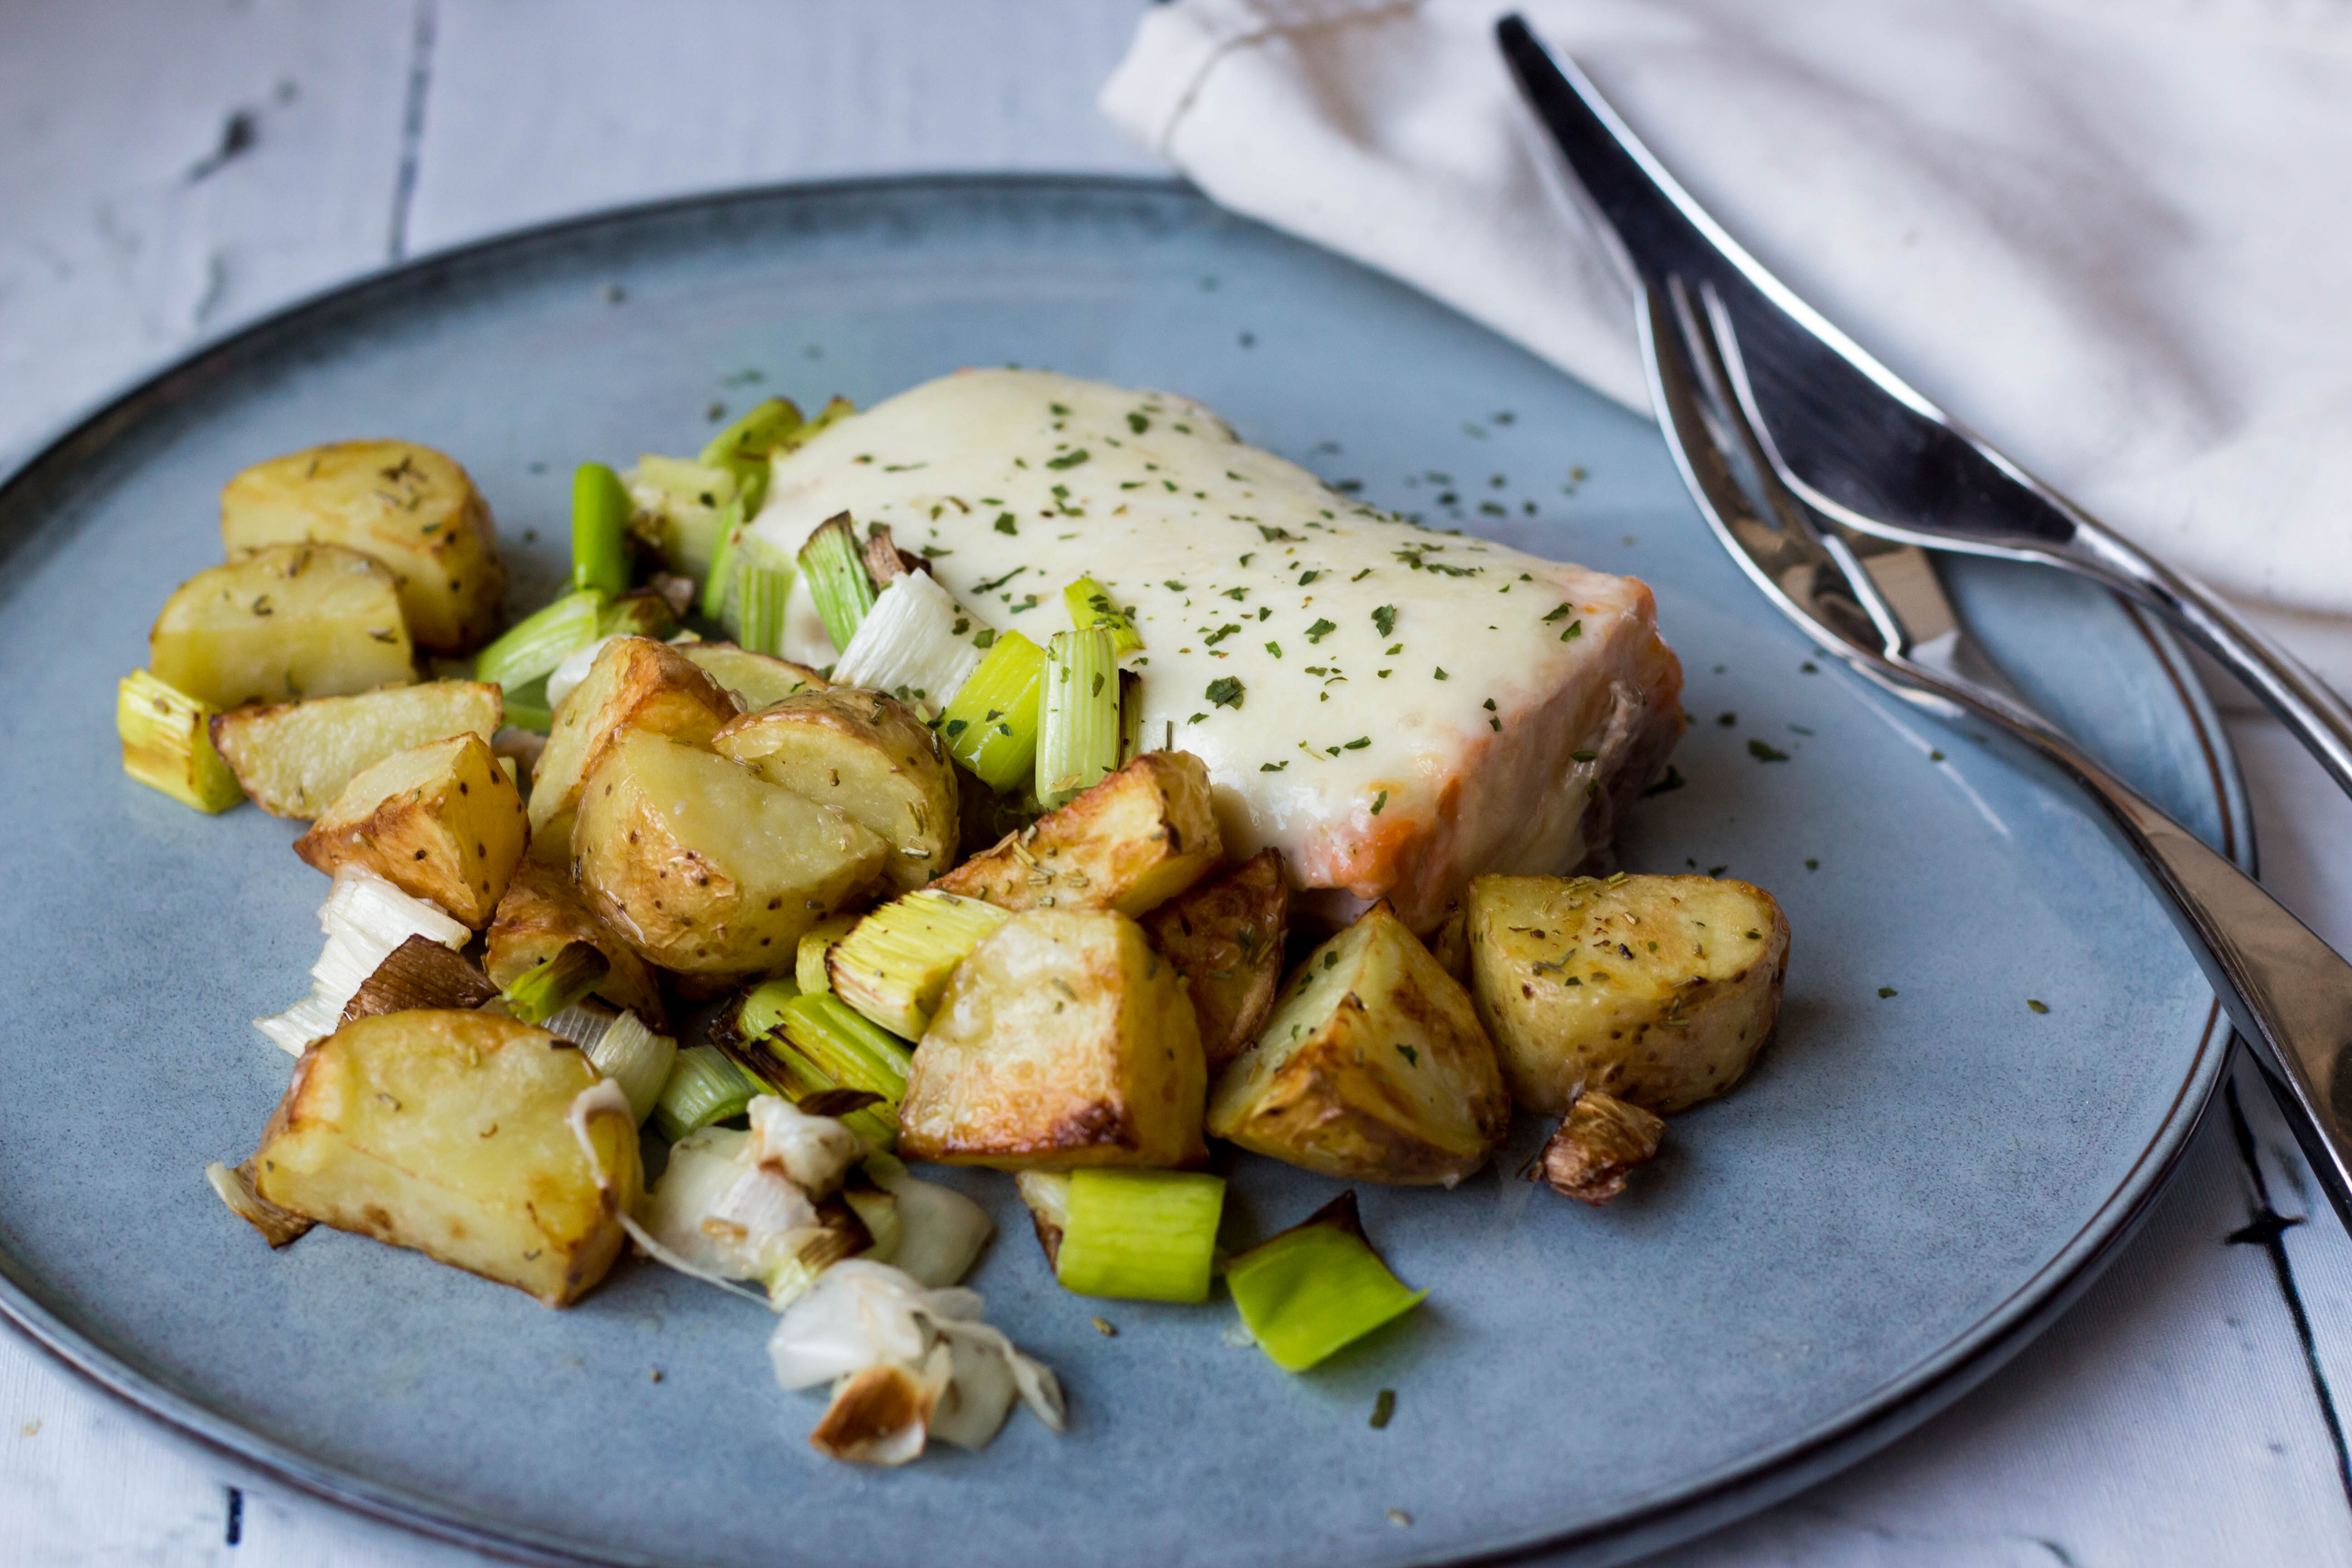 Potatoes in skin with salmon fillet, mozzarella and leeks